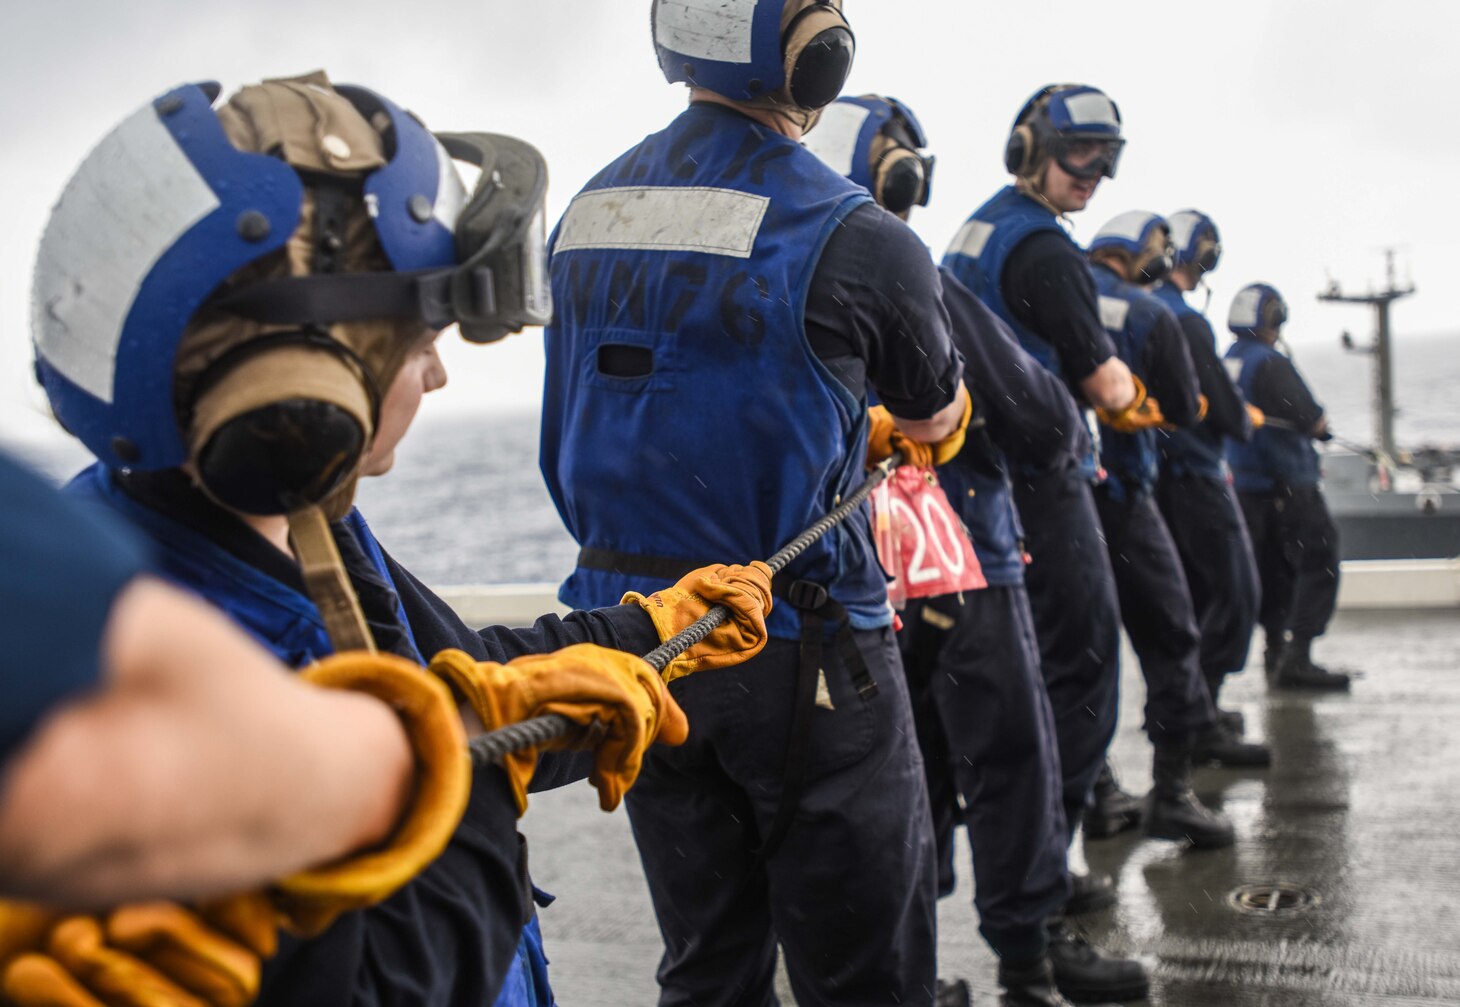 Midshipmen man the phone and distance line aboard the forward-deployed aircraft carrier, USS Ronald Reagan (CVN 76), during a replenishment at sea with the Military Sealift Command Dry Cargo and Ammunition Ship USNS Charles Drew (T-AKE 10). Eighteen midshipmen are embarked aboard Ronald Reagan as part of a training program designed to familiarize the students with real-world shipboard operations. Ronald Reagan, the flagship of Carrier Strike Group 5, provides a combat-ready force that protects and defends the collective maritime interests of its allies and partners in the Indo-Pacific region.